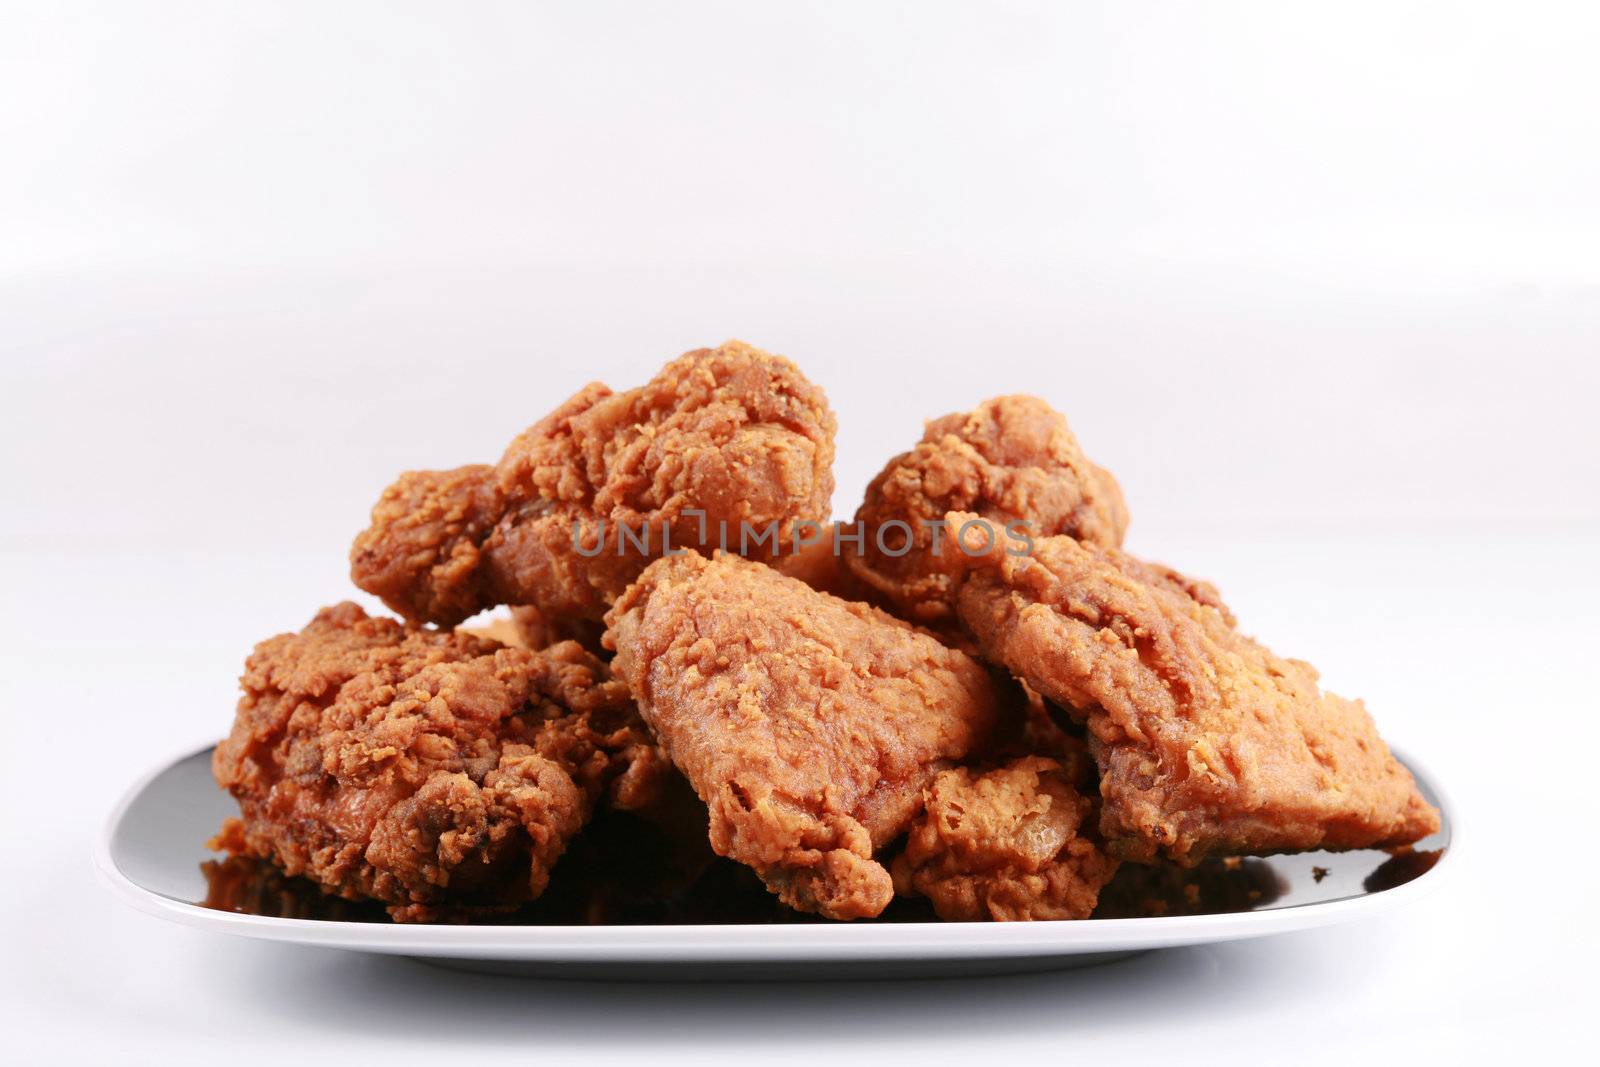 Plate of crispy, delicious fried chicken